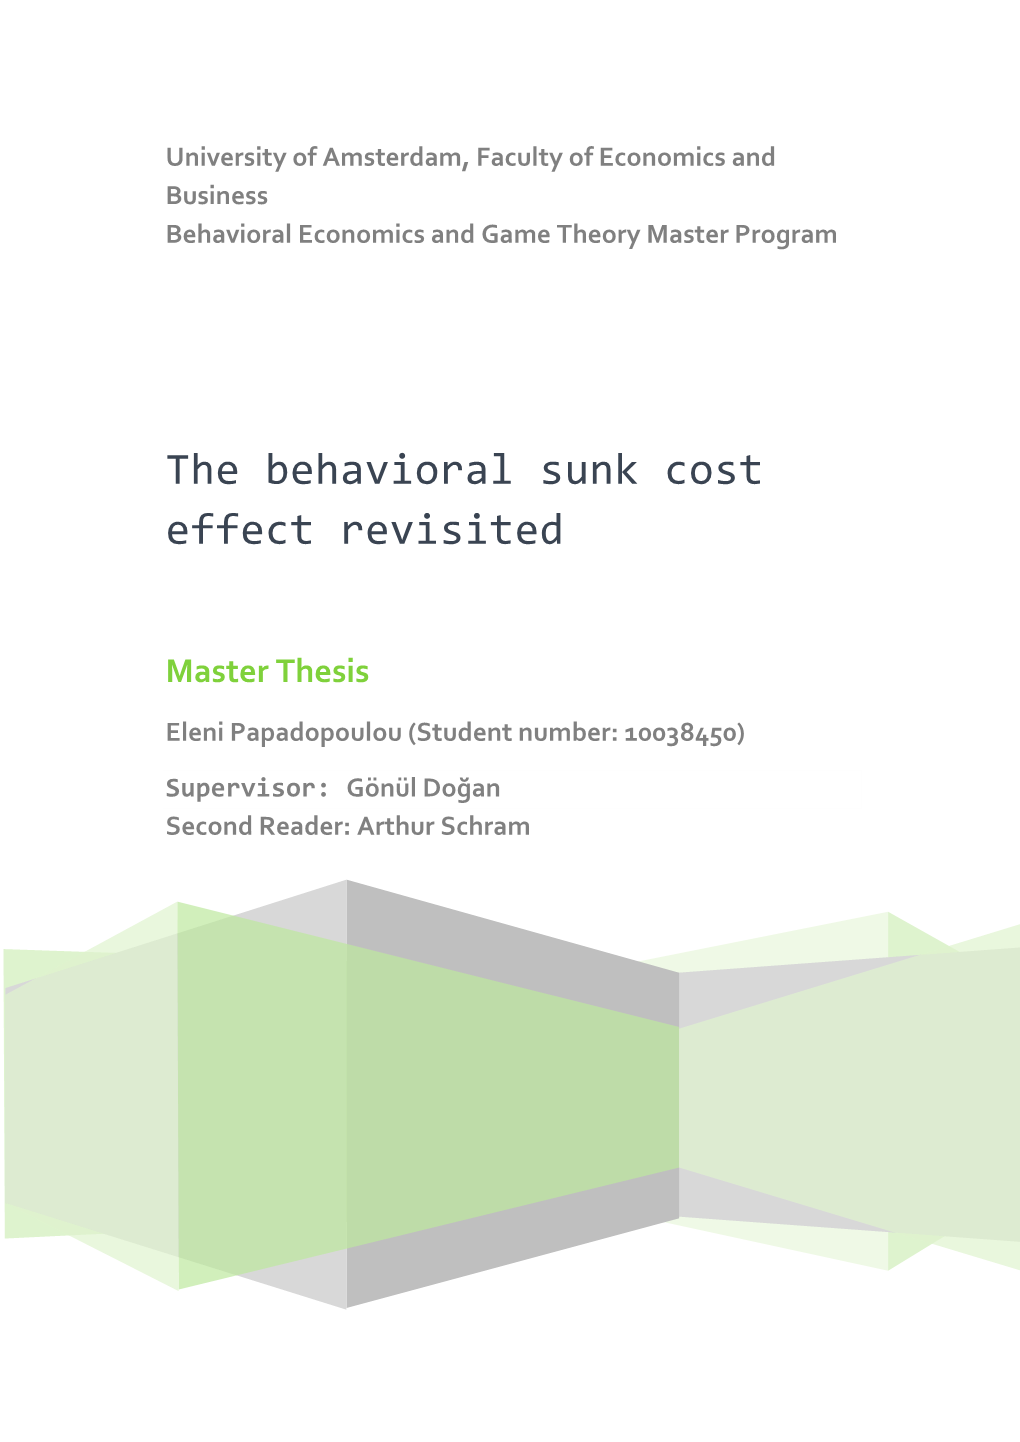 The Behavioral Sunk Cost Effect Revisited